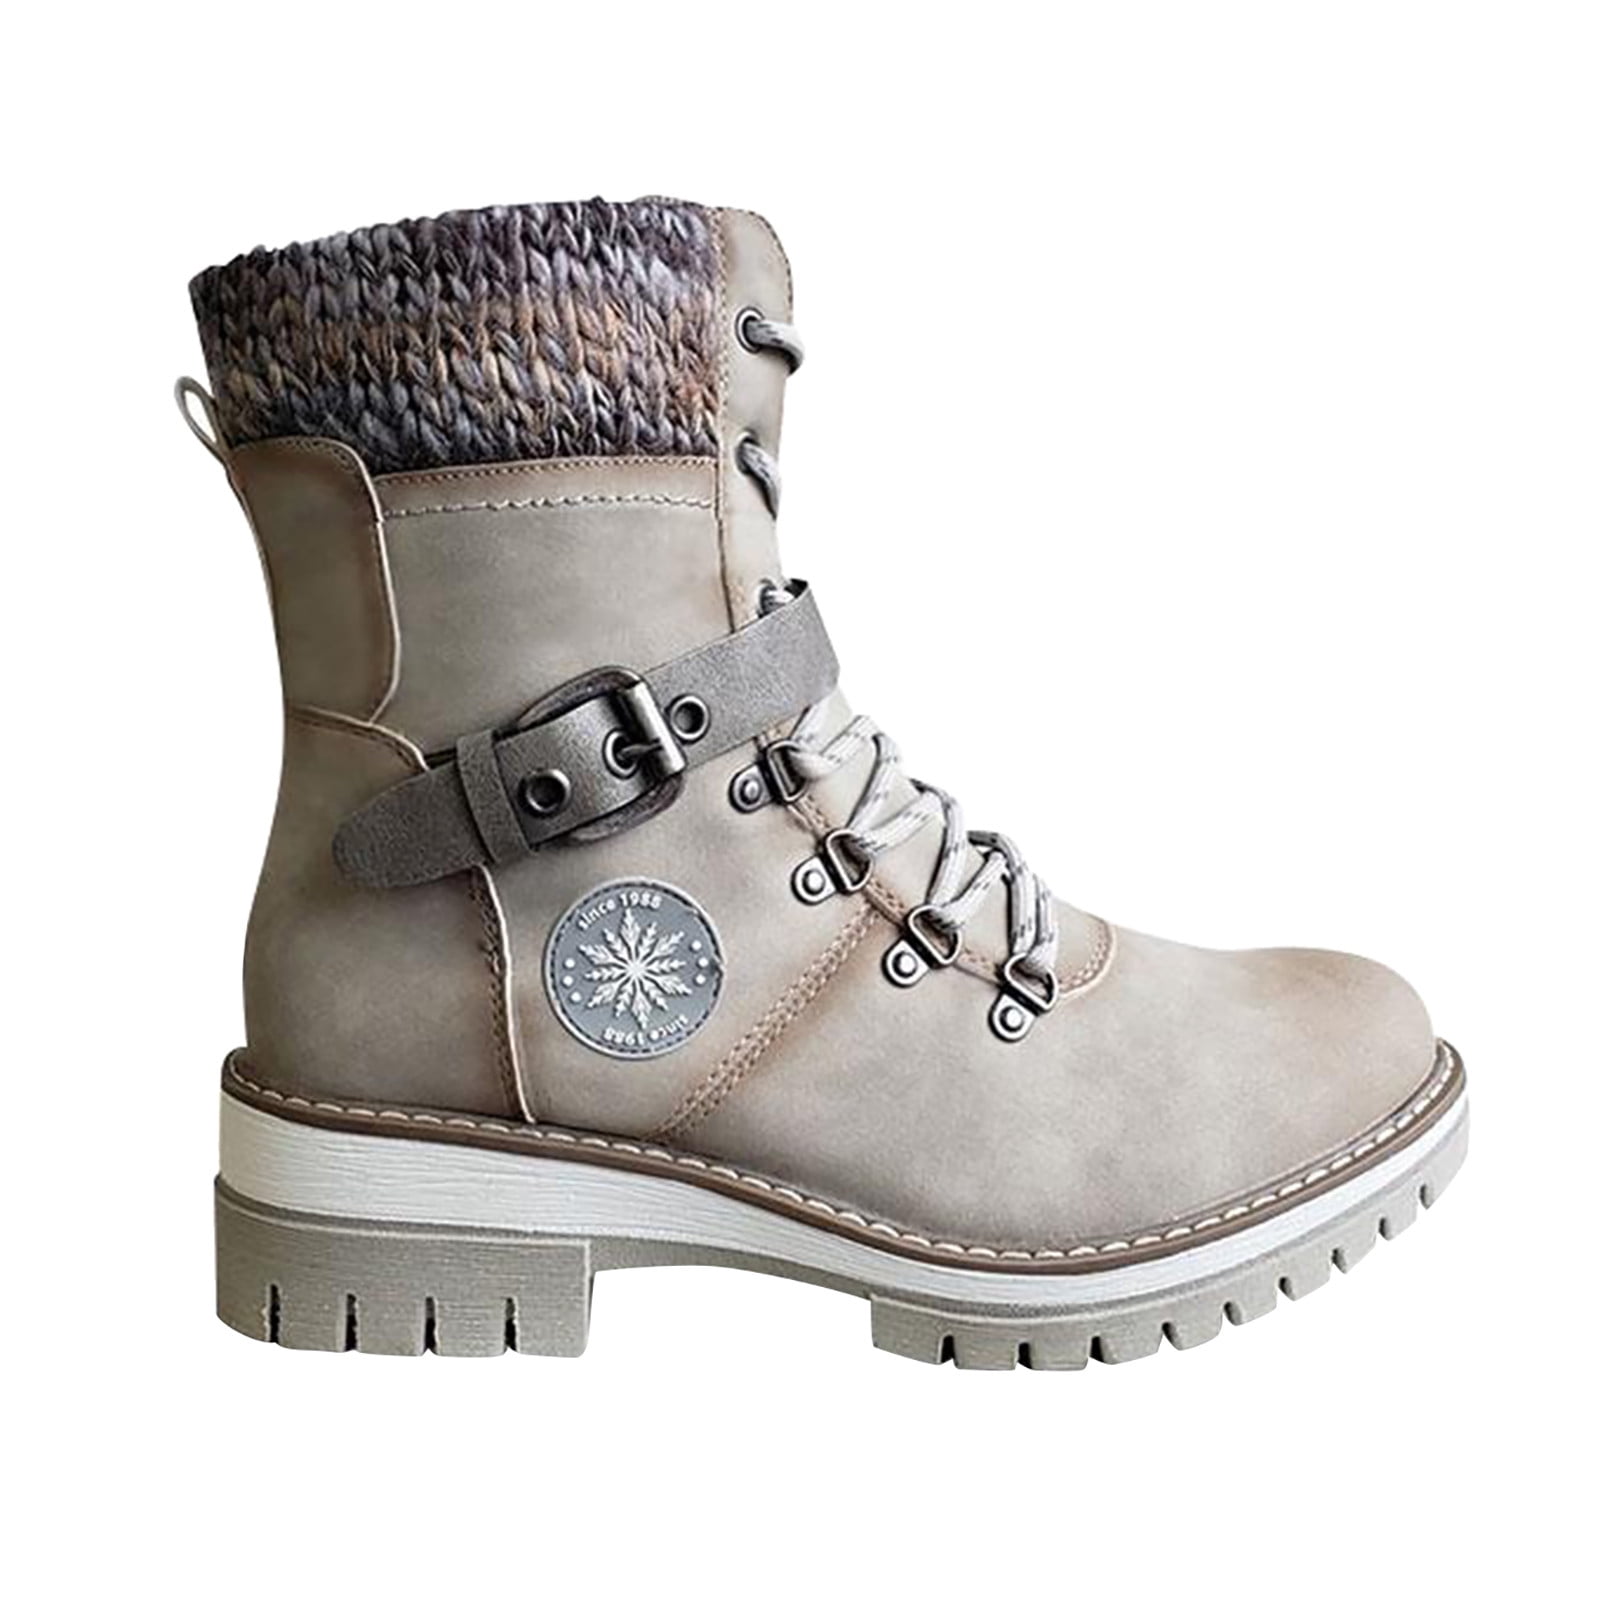 Juebong Mid-low-tube Boots Arch Support Winter Autumn Comfortable Lightweight Outdoor Wool Stitching Boots Wool Boots,White Size 6.5 - Walmart.com